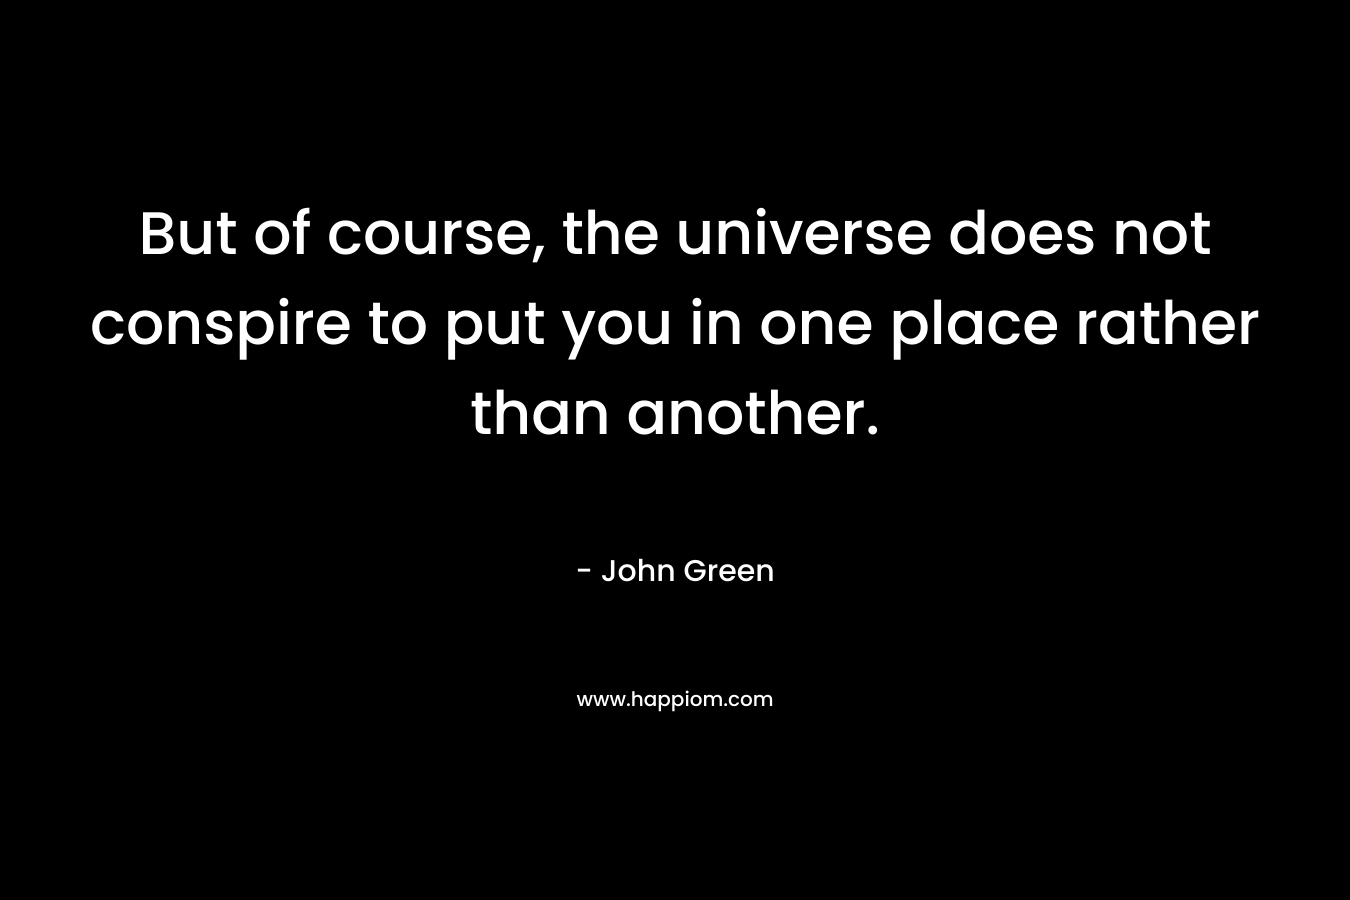 But of course, the universe does not conspire to put you in one place rather than another.